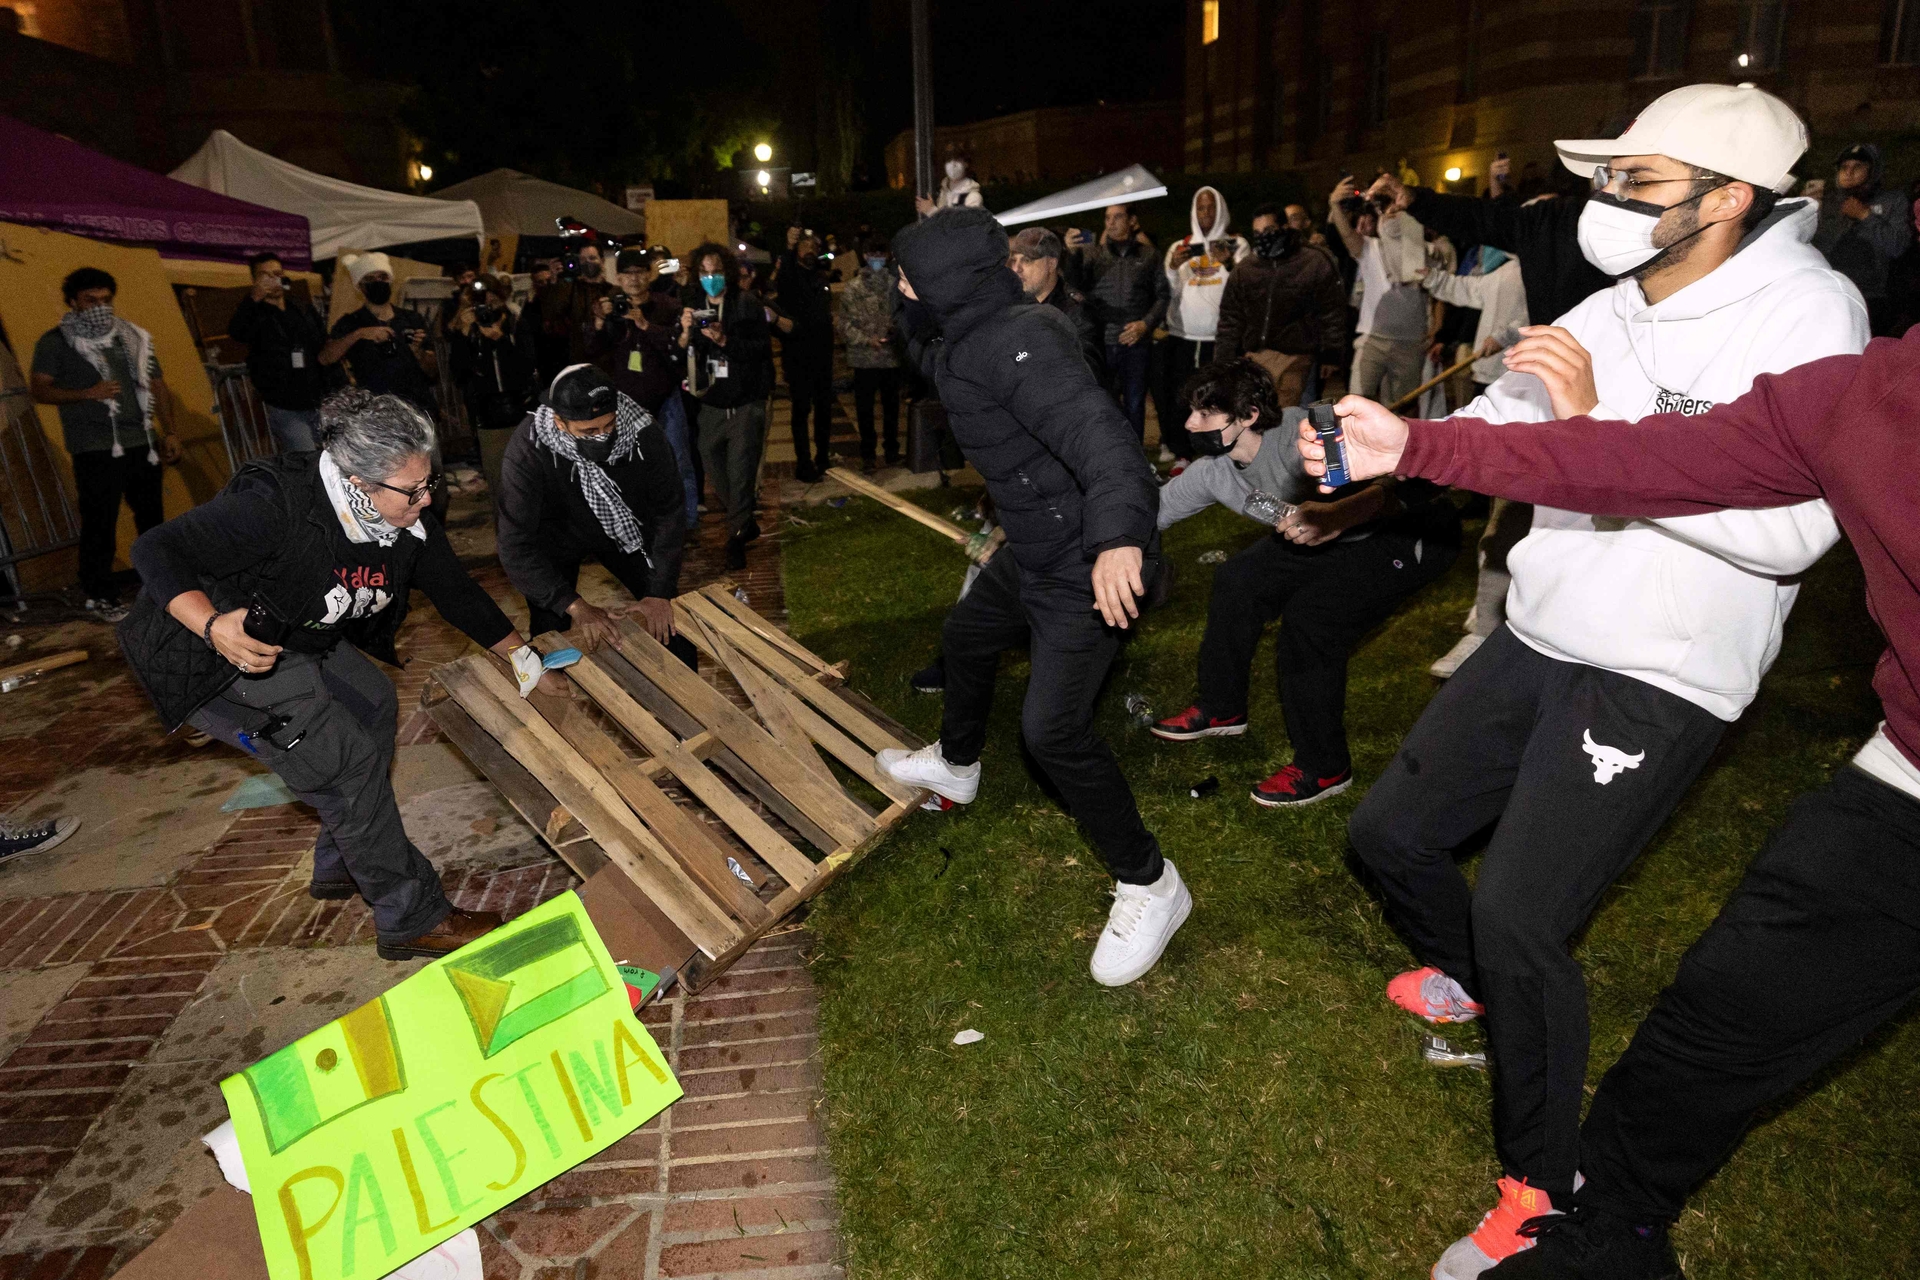 US campus protests over Gaza war erupt into violent clashes between rival groups